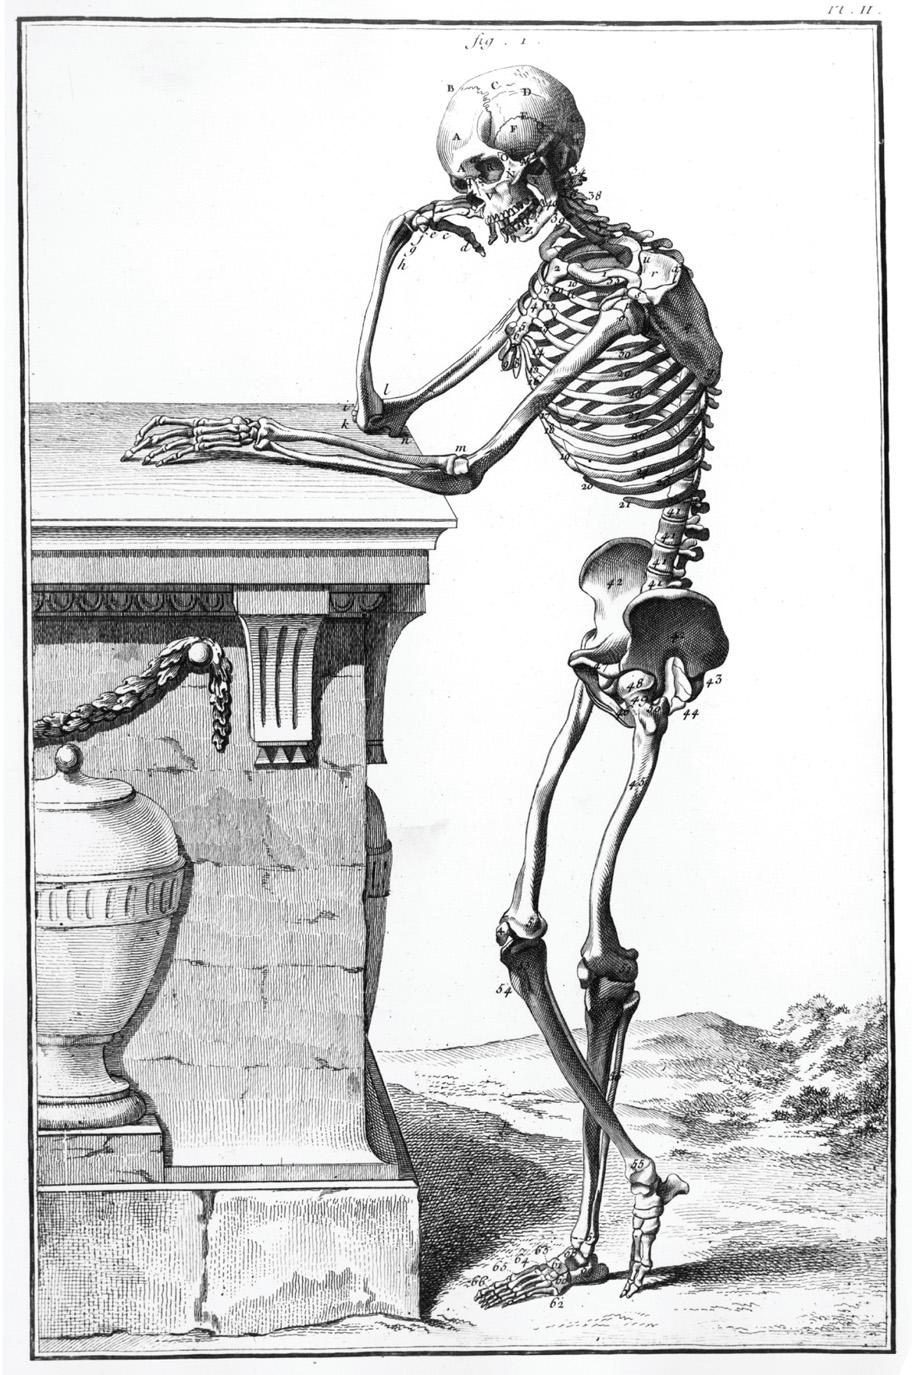 Anatomy, one of the many illustrations included in Diderot s Encyclopedia, provided labels for each of the bones in an articulated skeleton that were then